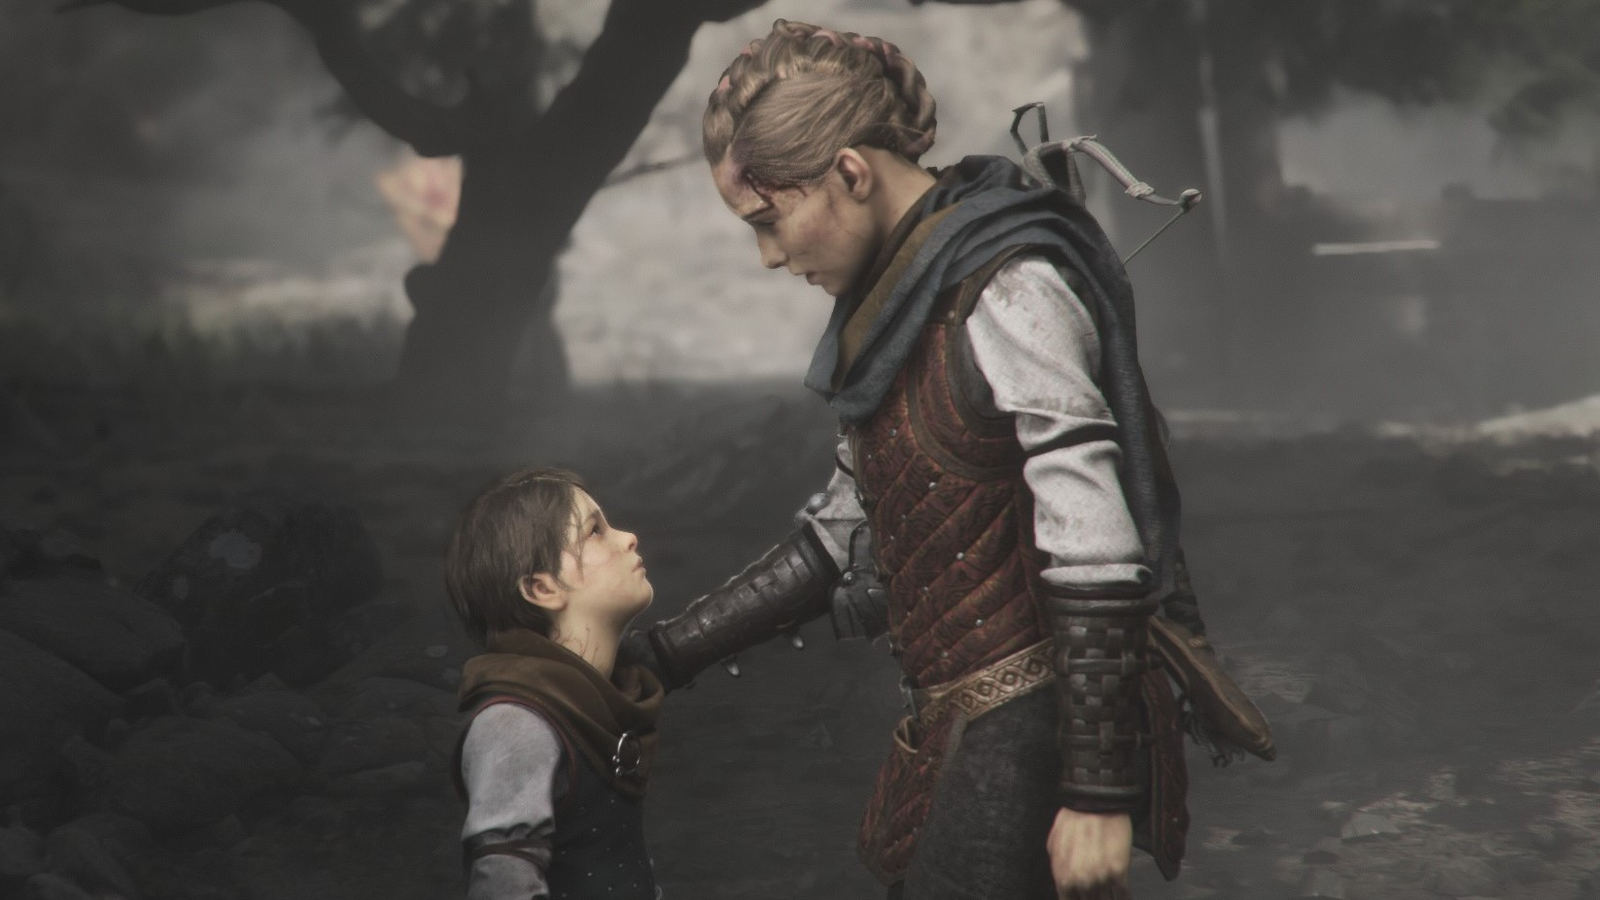 A Plague Tale: Requiem launches into Xbox Game Pass in October